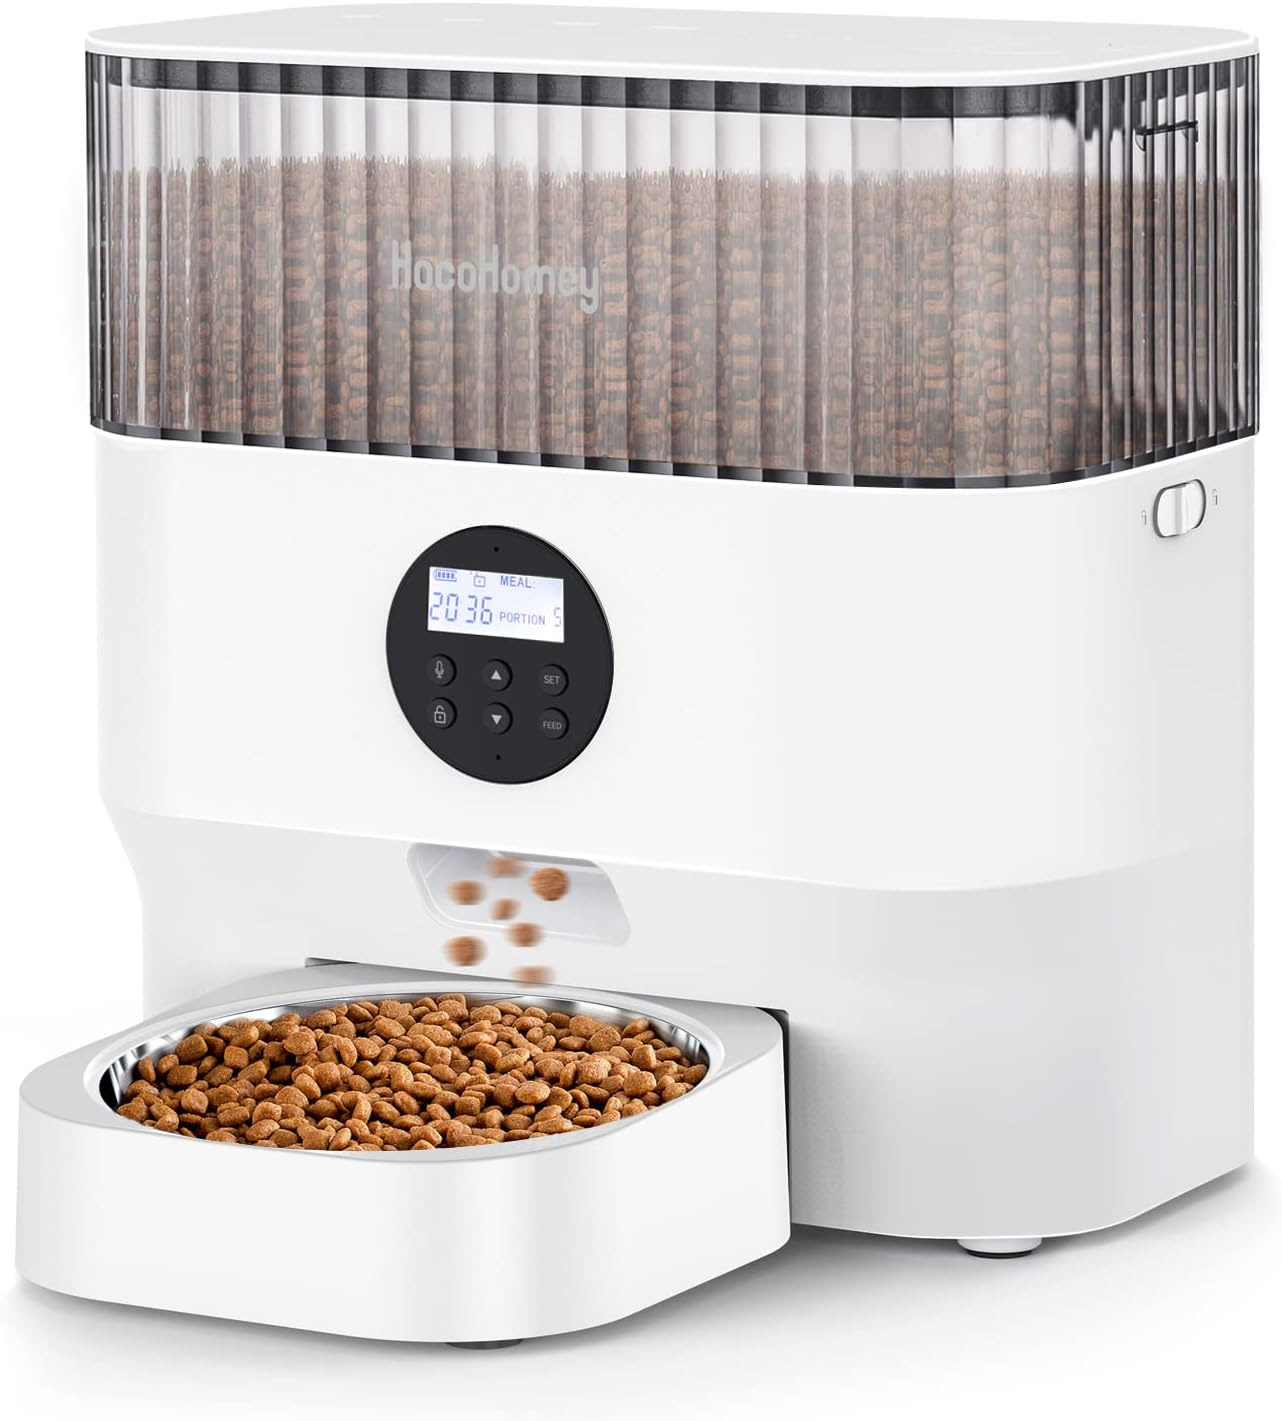 5L Automatic Cat Feeder, Auto Pet Feeder for Cats Dogs, Dry Food Dispenser, Smart Timed Feeder                               